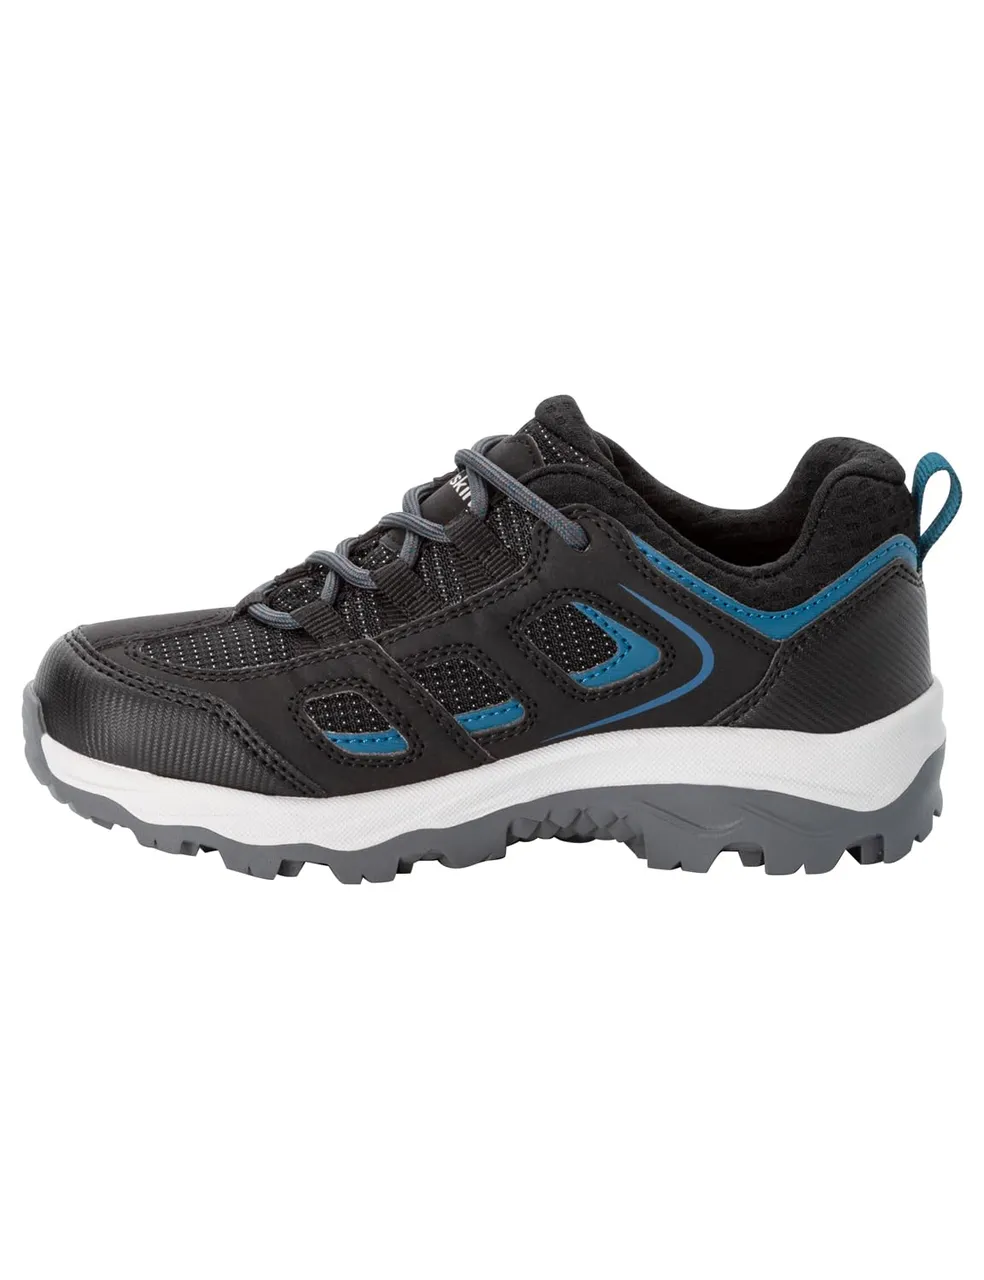 Jack Wolfskin Vojo Texapore Low K Outdoor Shoes